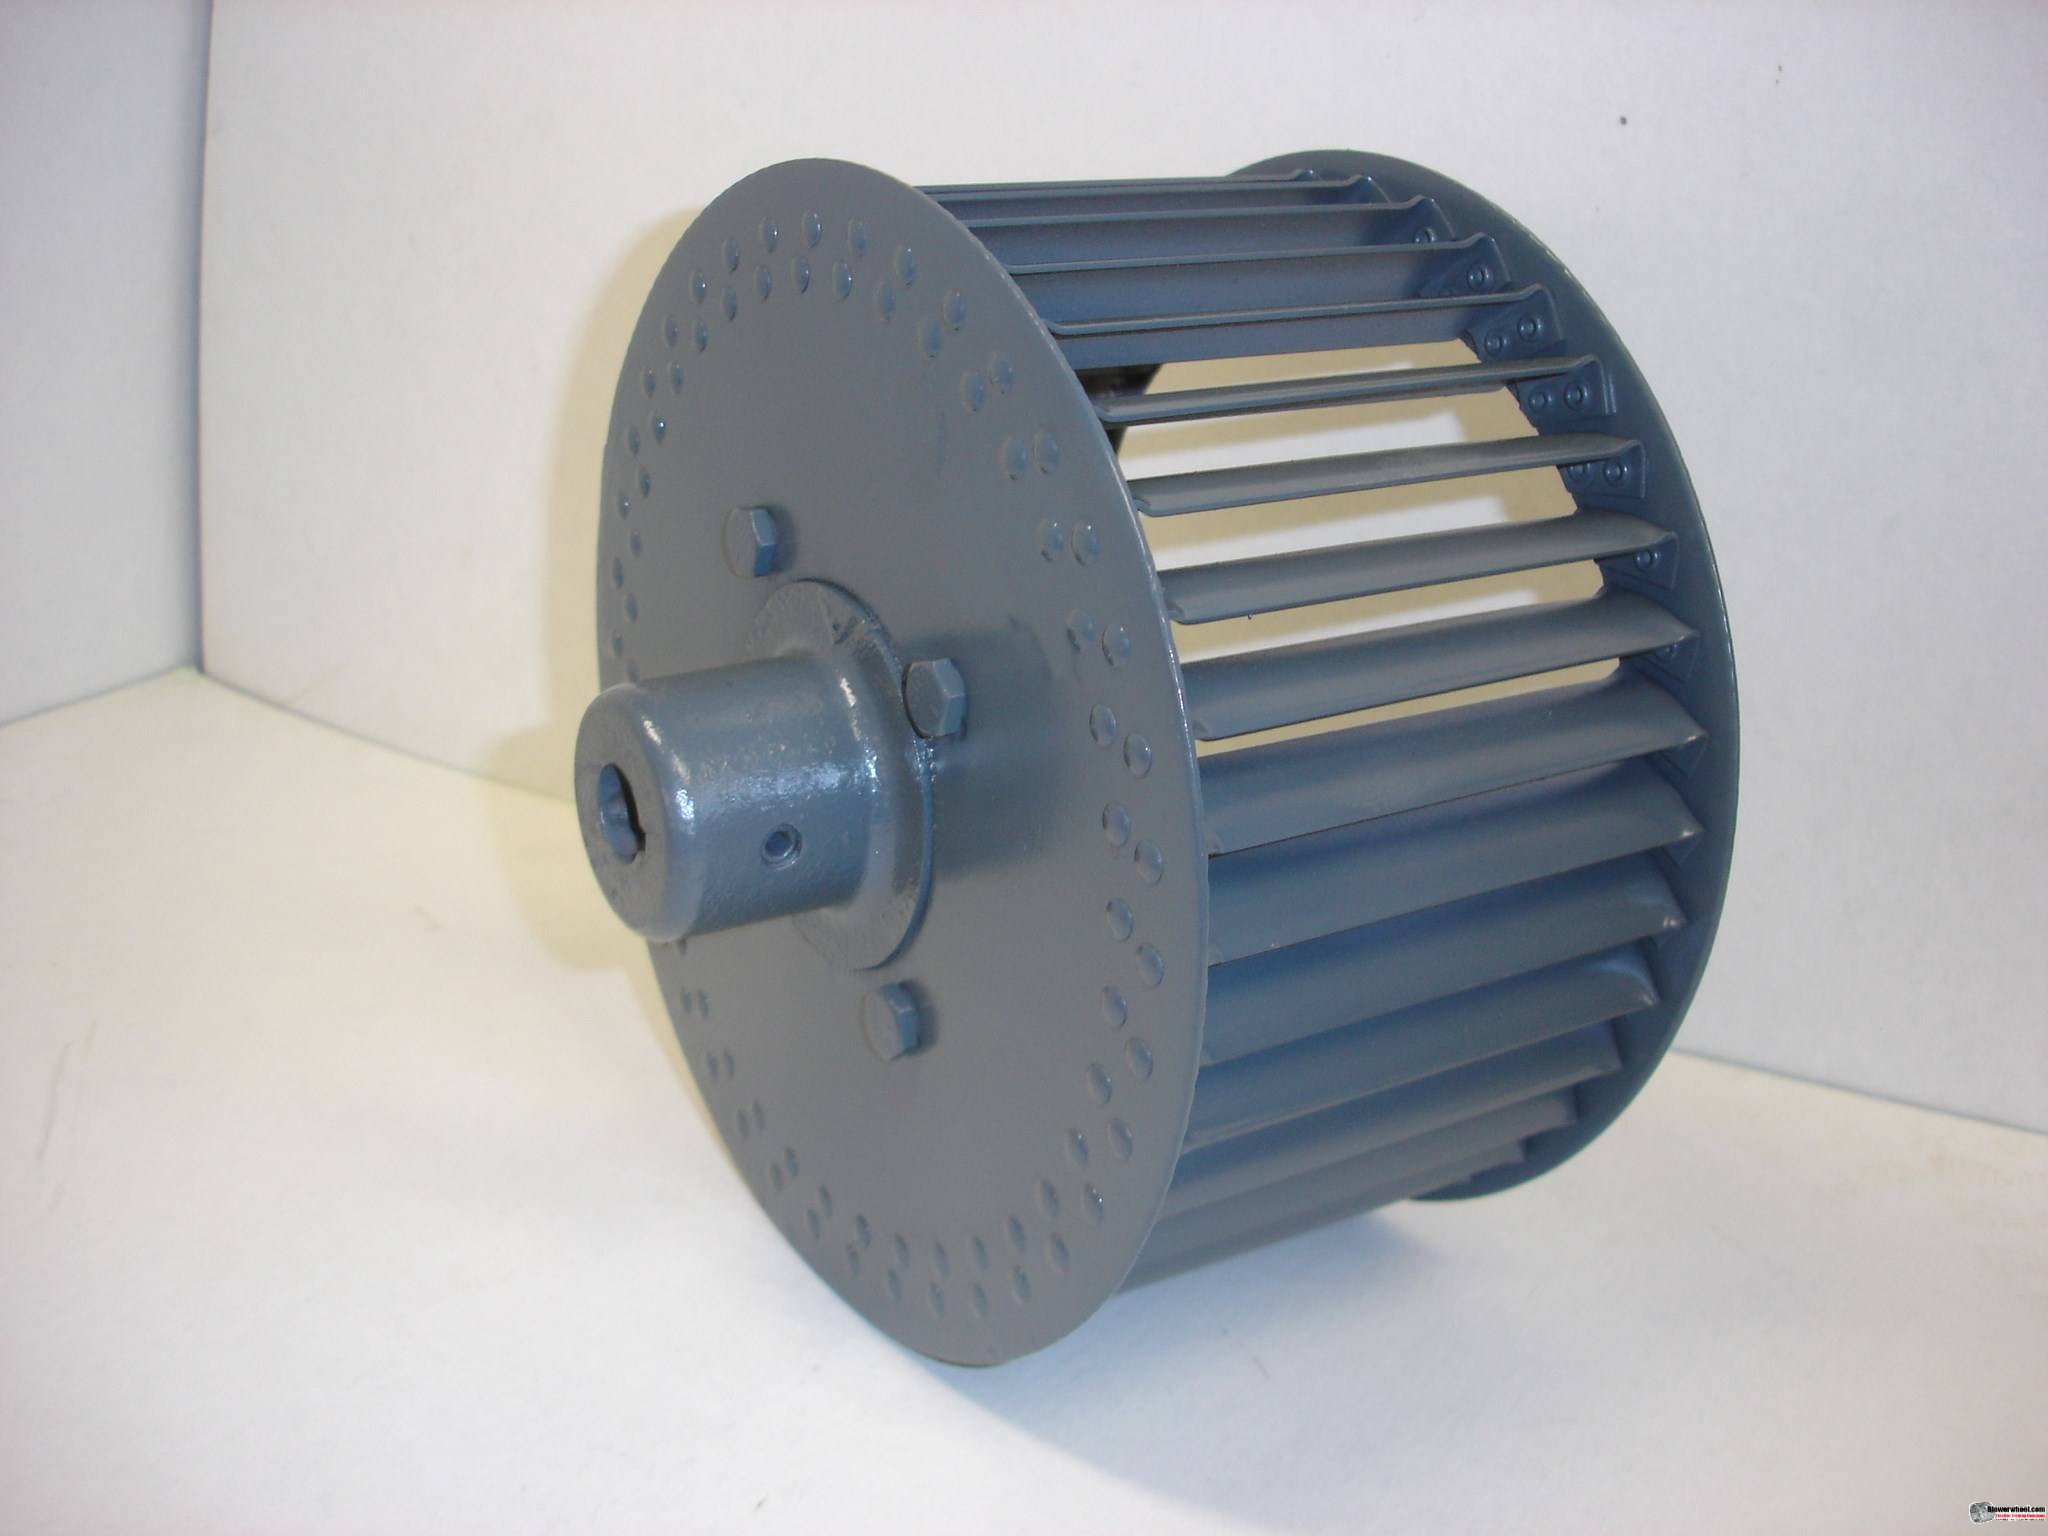 Single Inlet Aluminum Blower Wheel 10-13/16" Diameter 4-1/8" Width 5/8" Bore Clockwise rotation with an Outside Hub